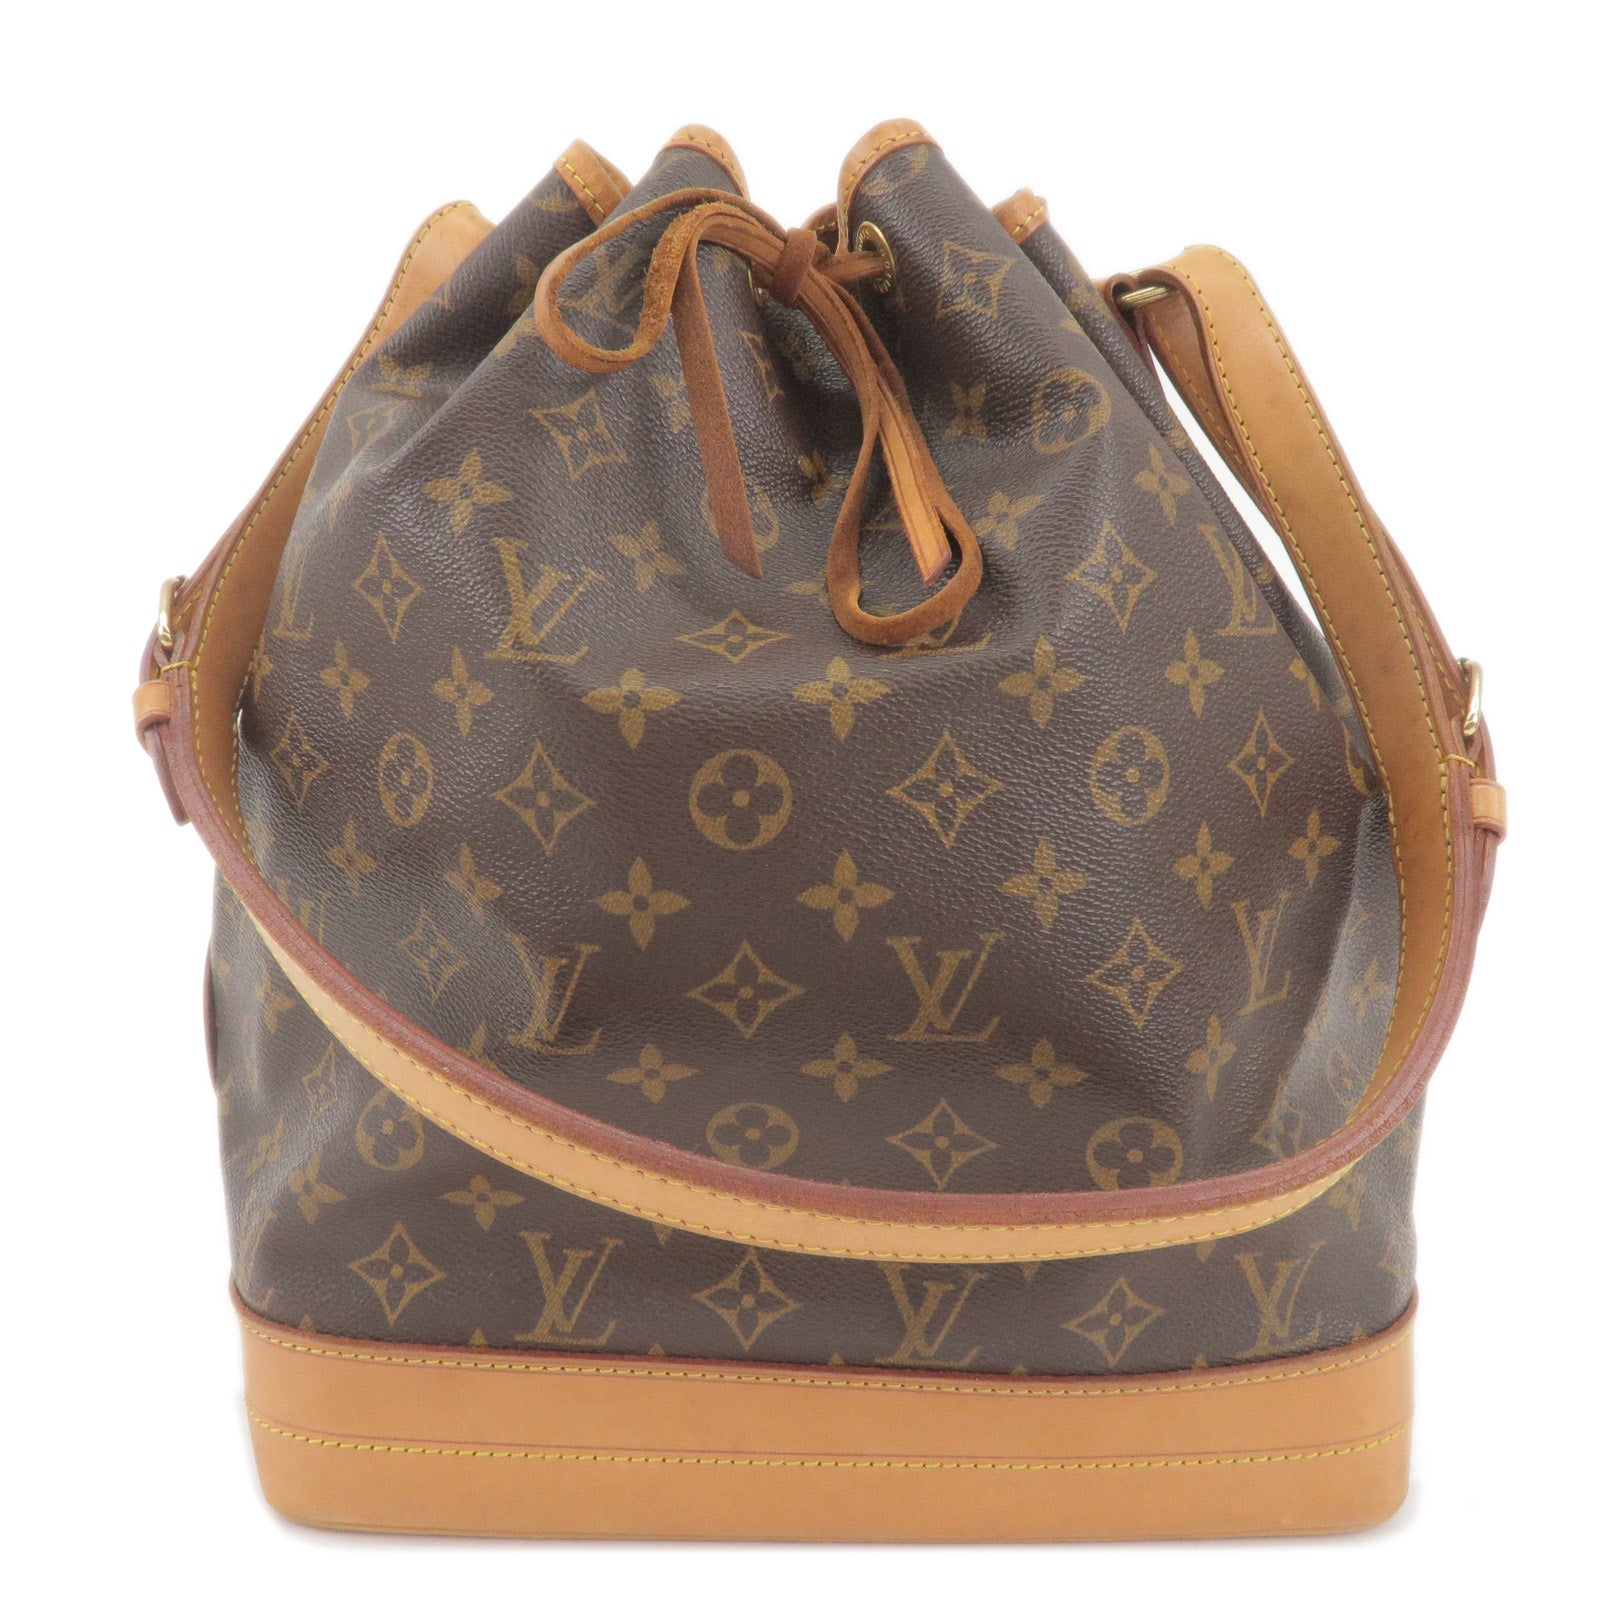 Woman with beige, brown and blue Louis Vuitton bag with golden and